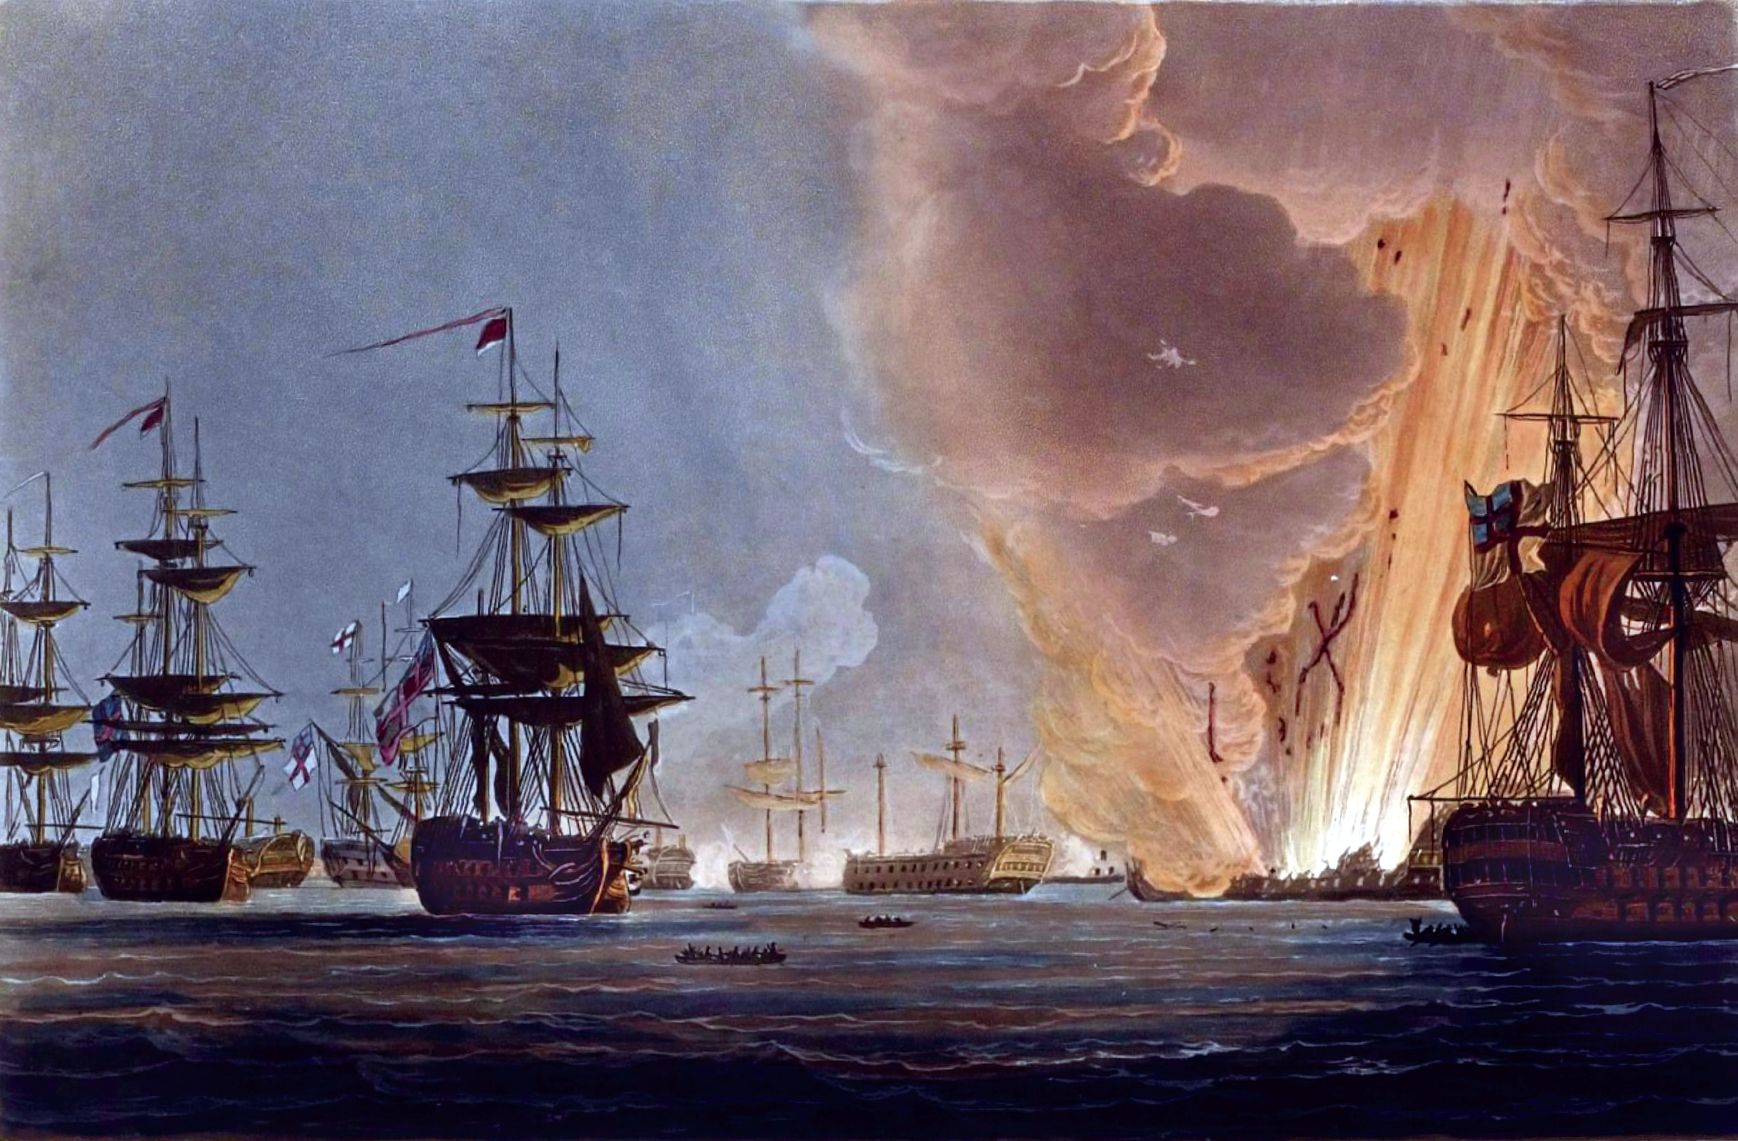 The French garrison in Alexandria heard the explosion of the French flagship L’Orient 20 miles away on the night of August 1. Rear Admiral Sir Horatio Nelson’s destruction of the French fleet in Aboukir Bay left Bonaparte’s army stranded in Egypt.